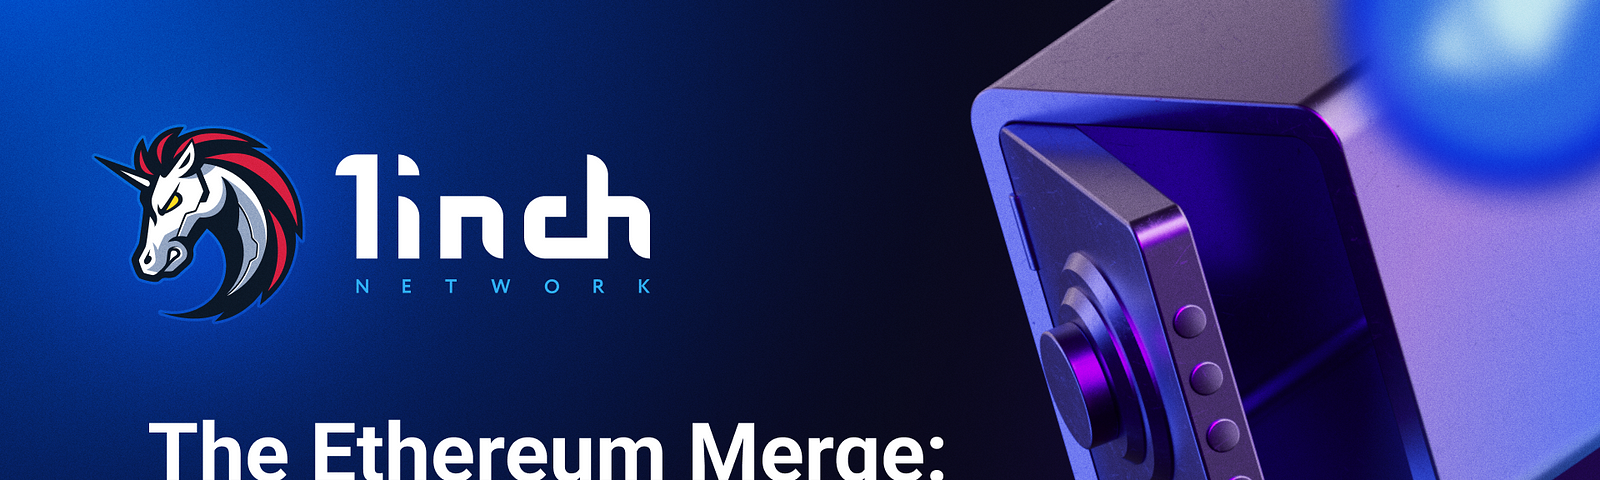 The Ethereum Merge: what to expect?